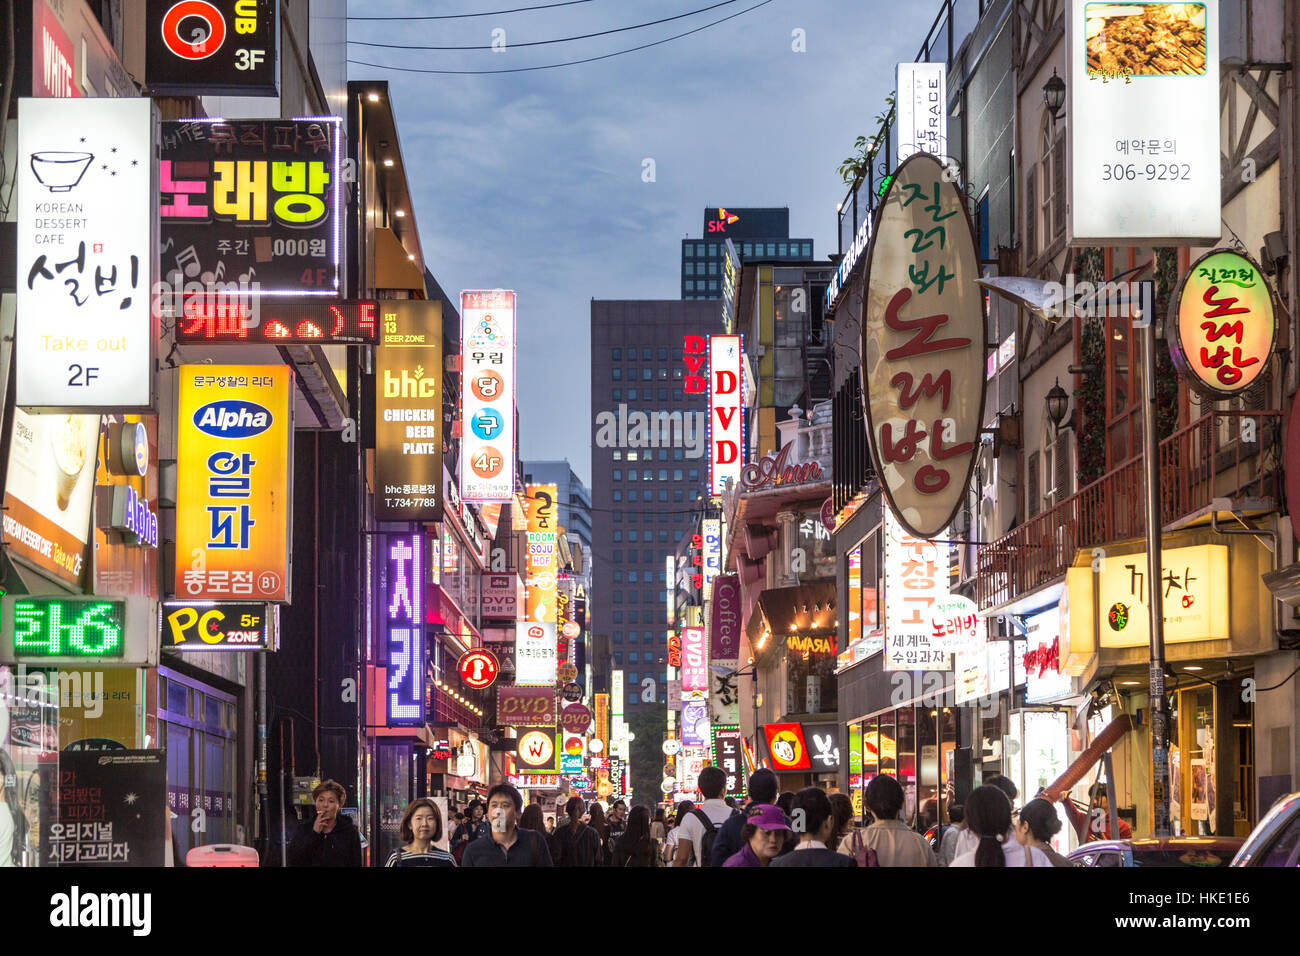 SEOUL, SOUTH KOREA - SEPTEMBER 12 2015: People wander in the walking streets of the Myeong-dong shopping district at night. Stock Photo